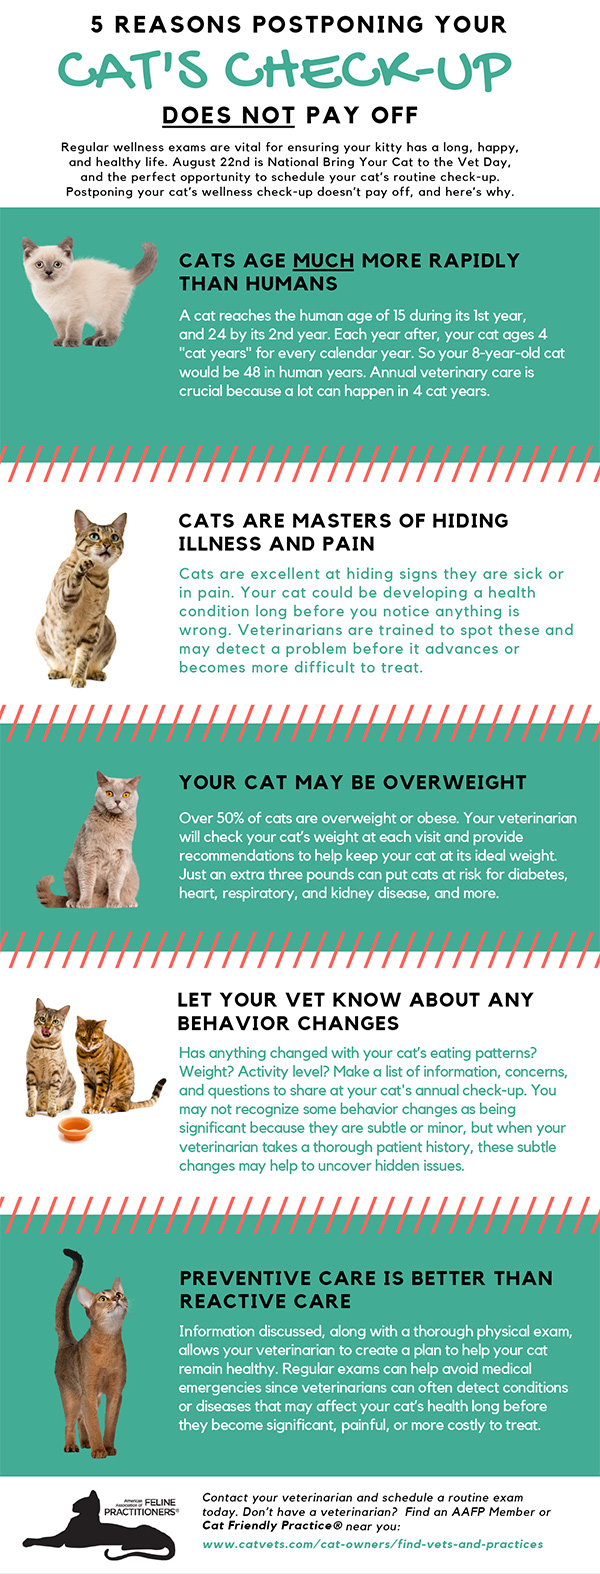 How to take care of your cat's health?